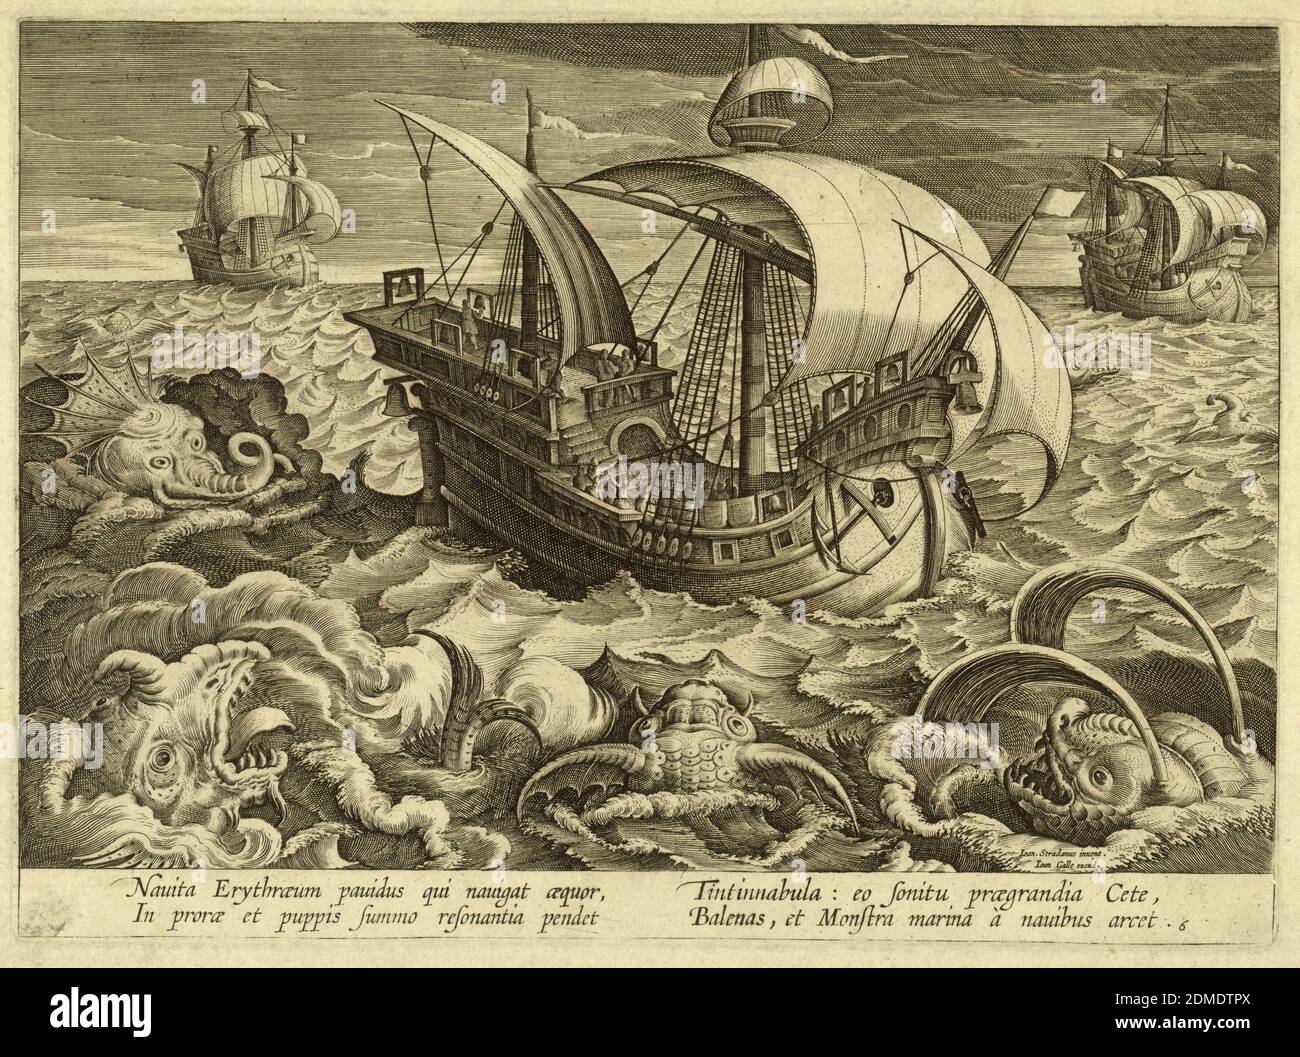 Three ships surrounded by monsters, Jan van der Straet, called Stradanus, Flemish, 1523–1605, Joannes Galle, Flemish, 1600 – 1676, Engraving on paper, Horizontal rectangle. Second state. At center, a ship surrounded by sea monsters; on its decks are men and many bells. In the background are two similar ships. In a choppy sea. Near right bottom corner: 'Joan. Stradanus invent. / Joan. Galle. excud.' Bottom margin: 'Nauita Erythraeum panidus qui navigat aequor / In prorae et puppis summo resonantia pendet / Tintinabula: eo sonitu praegrandia late, Balenas et Monstra marina à navibus arcet.' Stock Photo